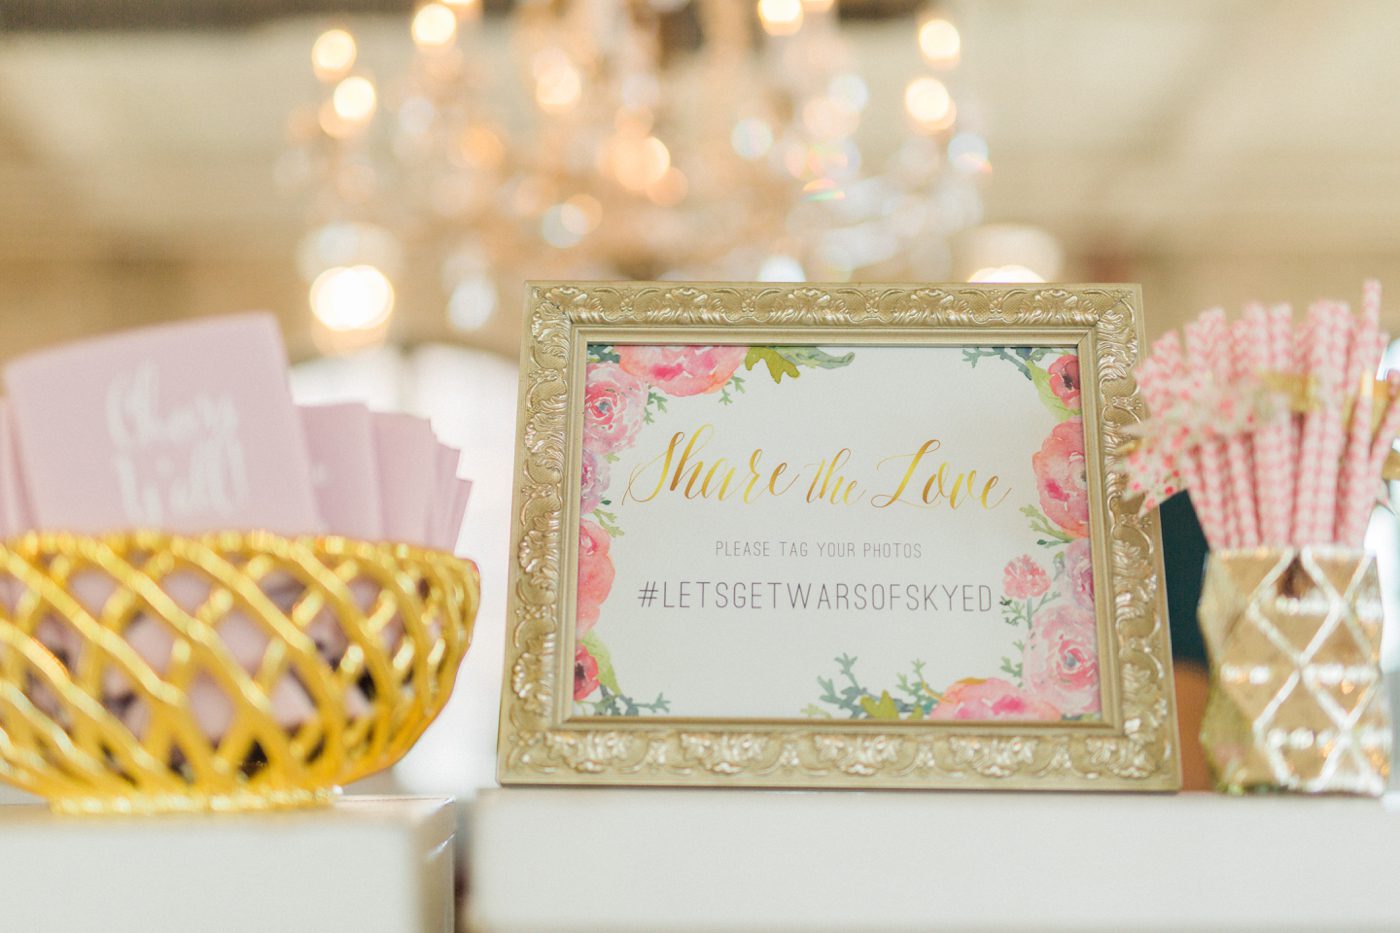 Blush gold and floral wedding reception inspiration with instagram hashtag 